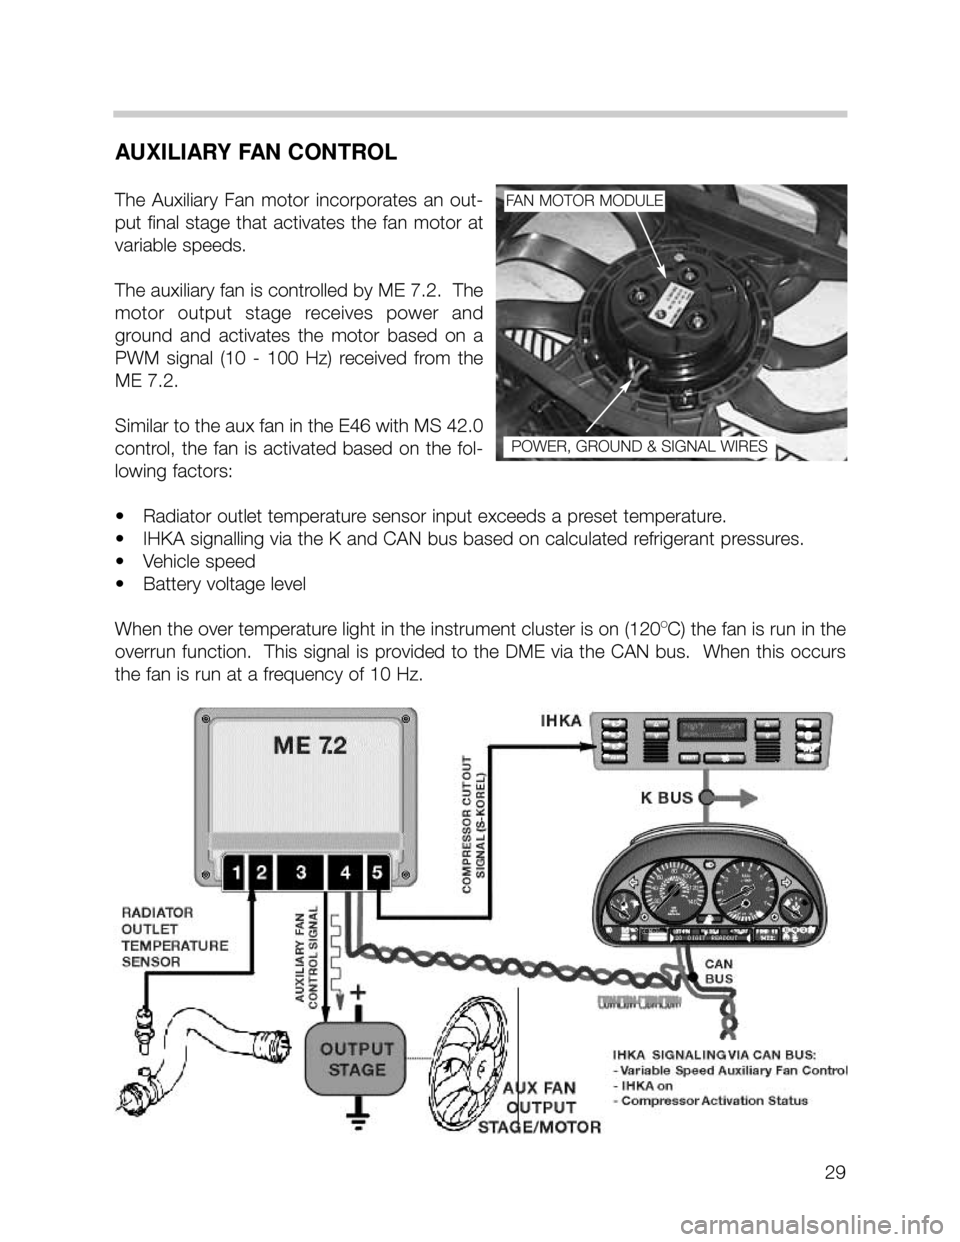 BMW X5 2005 E53 M62TU Engine Owners Manual 29
AUXILIARY FAN CONTROL
The  Auxiliary  Fan  motor  incorporates  an  out-
put  final  stage  that  activates  the  fan  motor  at
variable speeds.  
The auxiliary fan is controlled by ME 7.2.  The
m